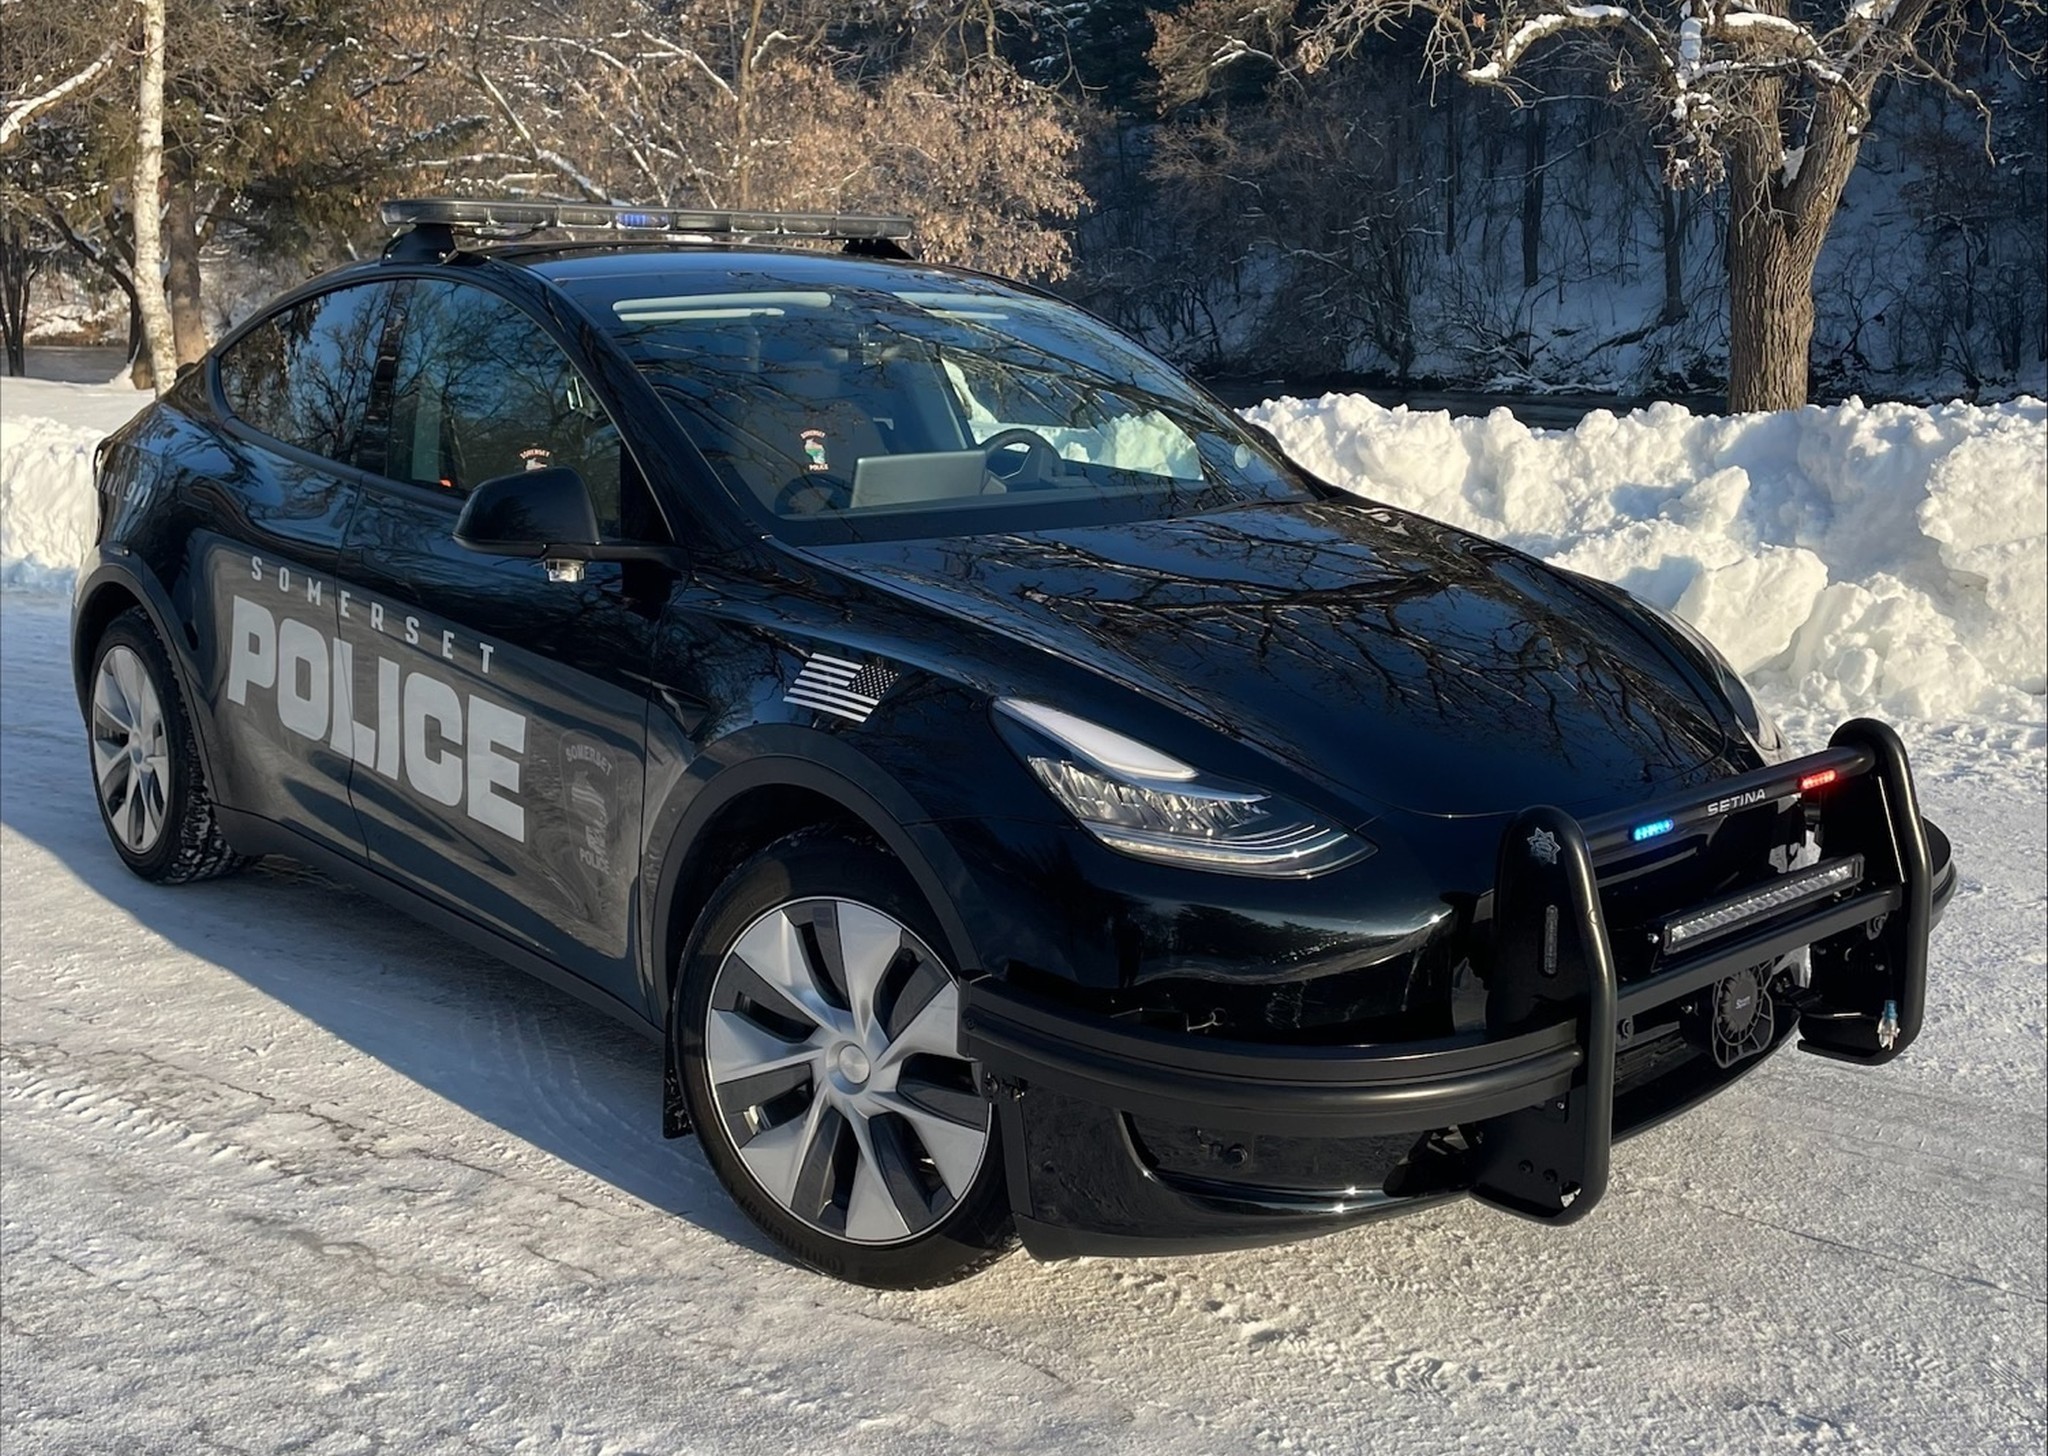 https://s1.cdn.autoevolution.com/images/news/gallery/the-tesla-model-y-is-a-badass-police-cruiser-will-save-somerset-pd-84000-over-10-years_4.jpg